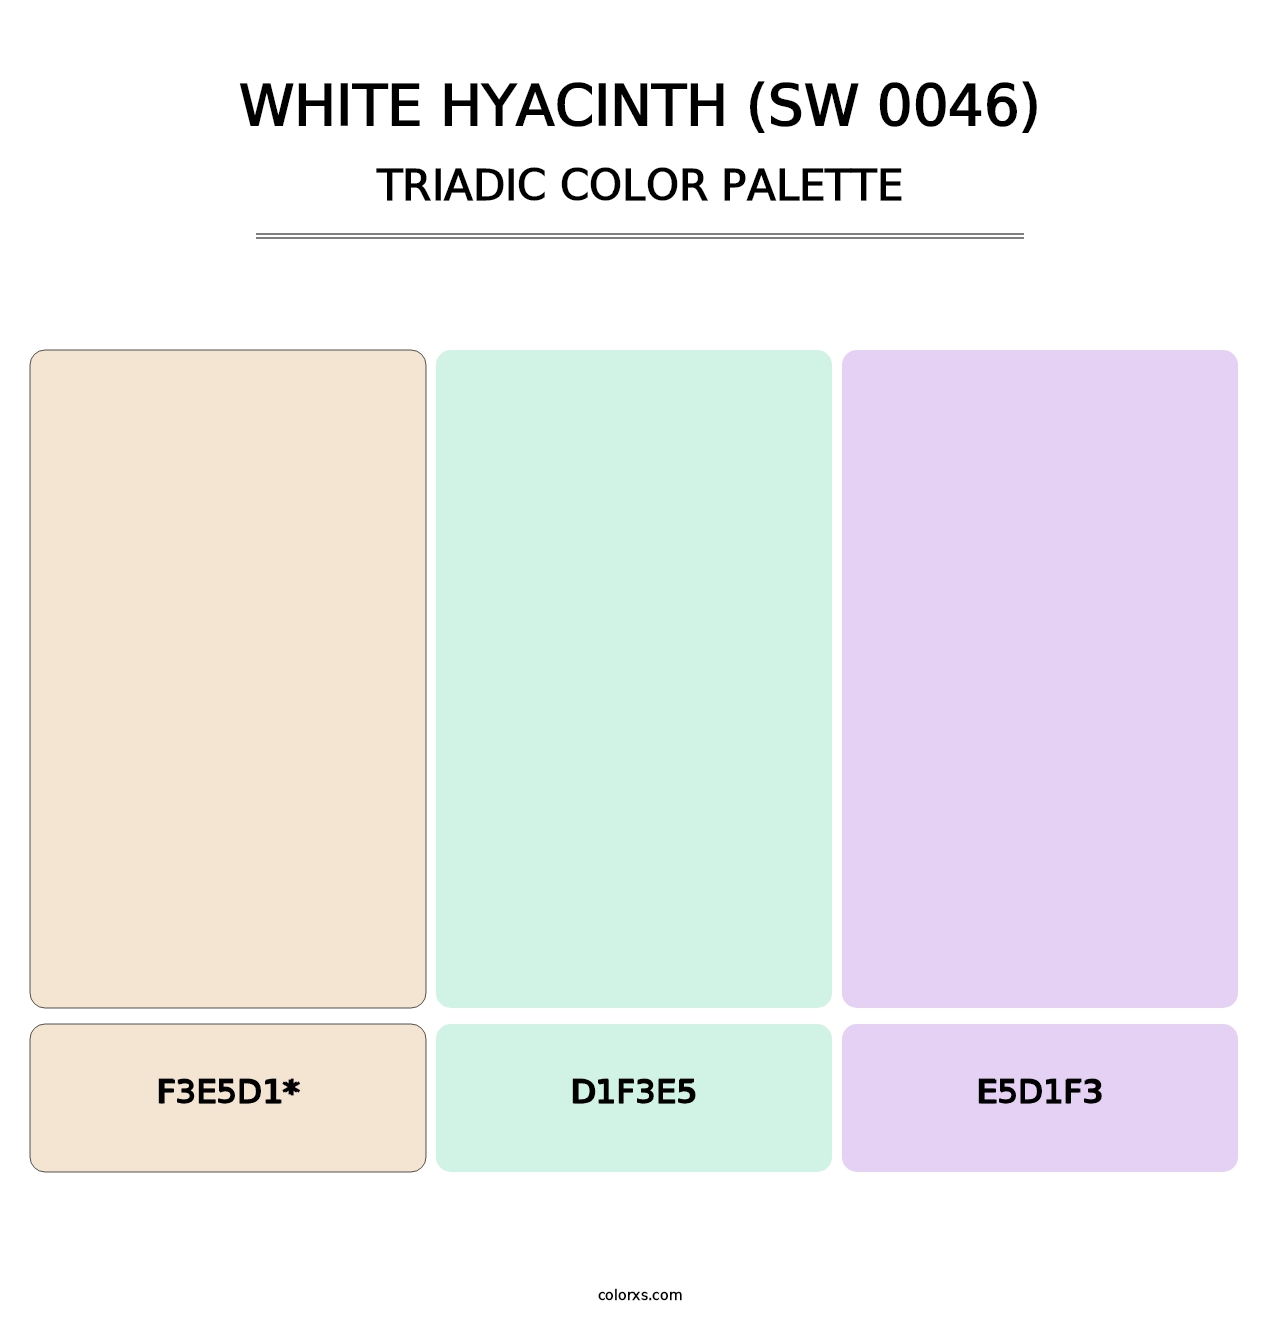 White Hyacinth (SW 0046) - Triadic Color Palette